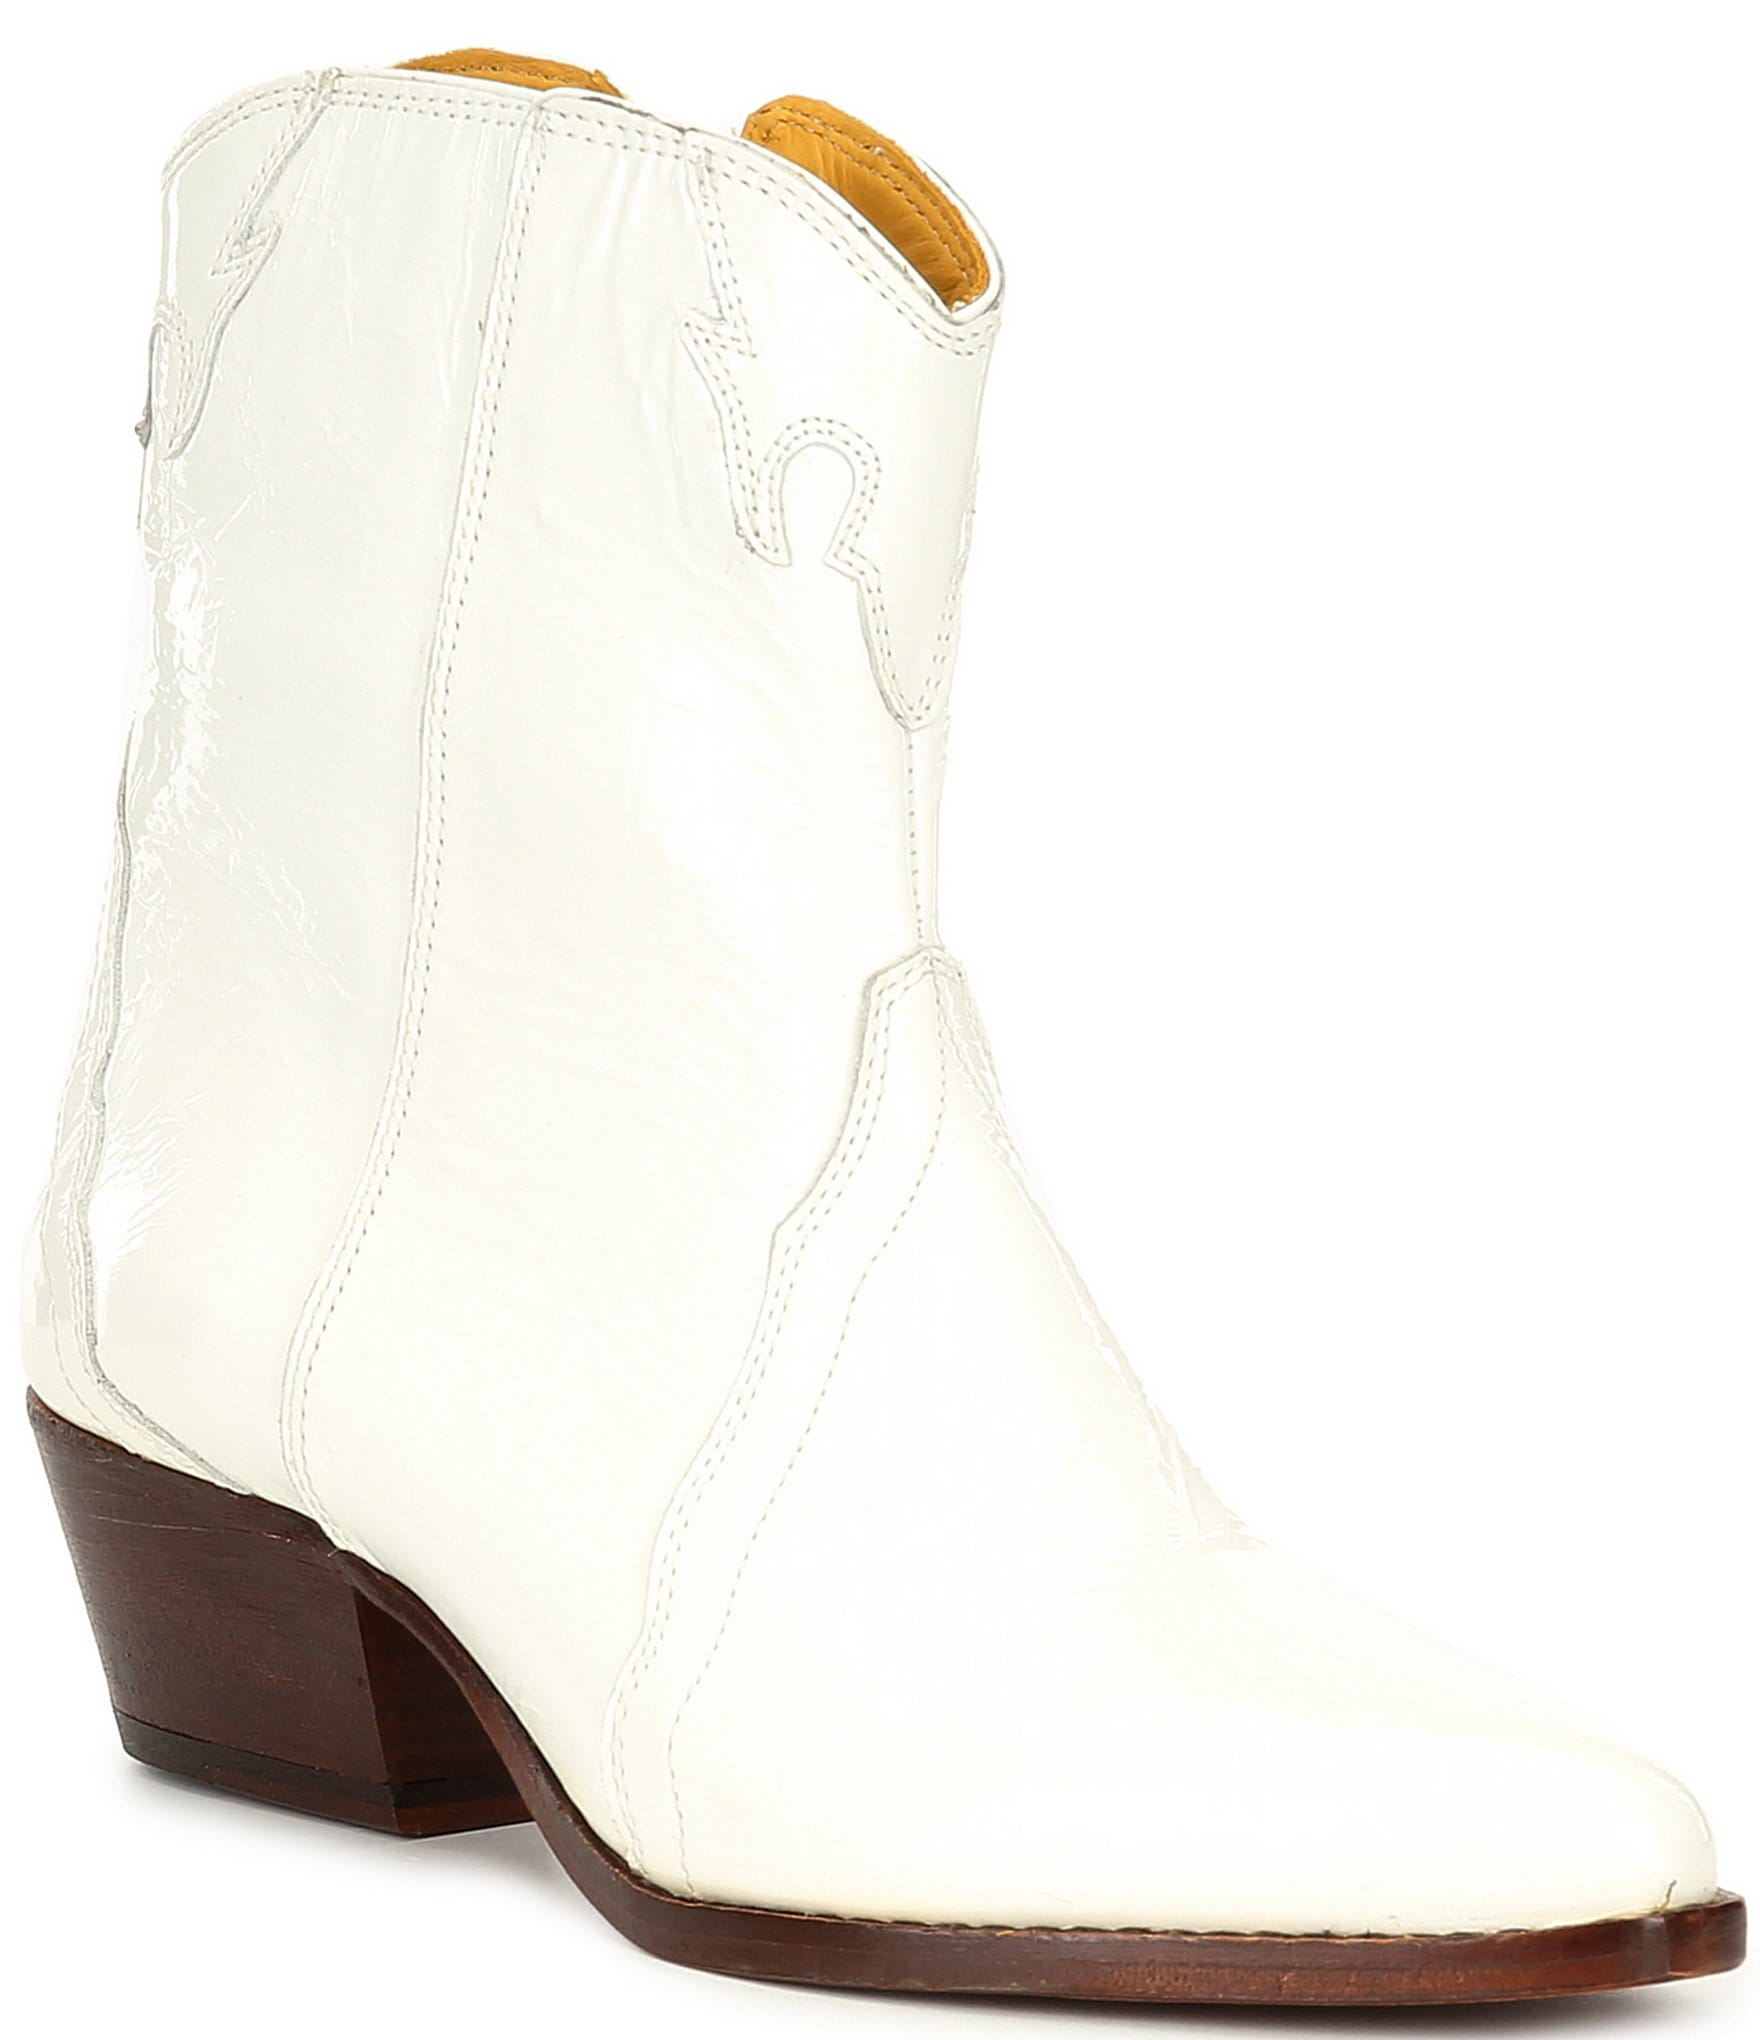 https://dimg.dillards.com/is/image/DillardsZoom/zoom/free-people-new-frontier-patent-leather-western-booties/05552928_zi_white.jpg